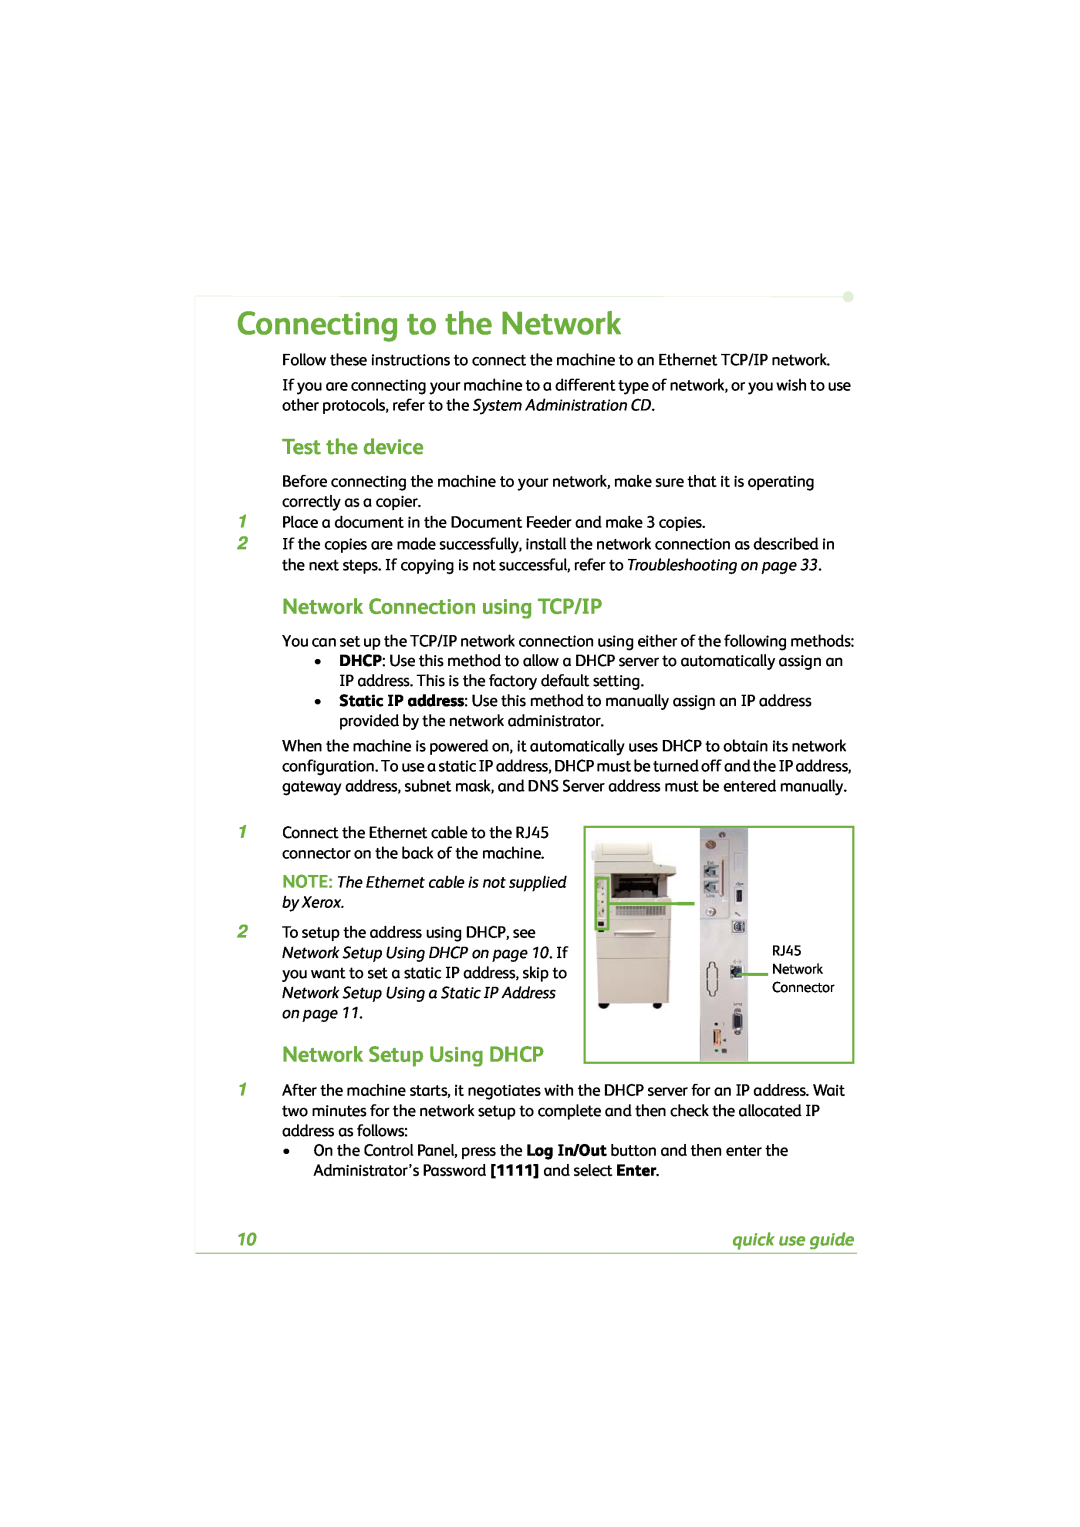 Xerox 4260C Connecting to the Network, Test the device, Network Connection using TCP/IP, Network Setup Using DHCP, on page 